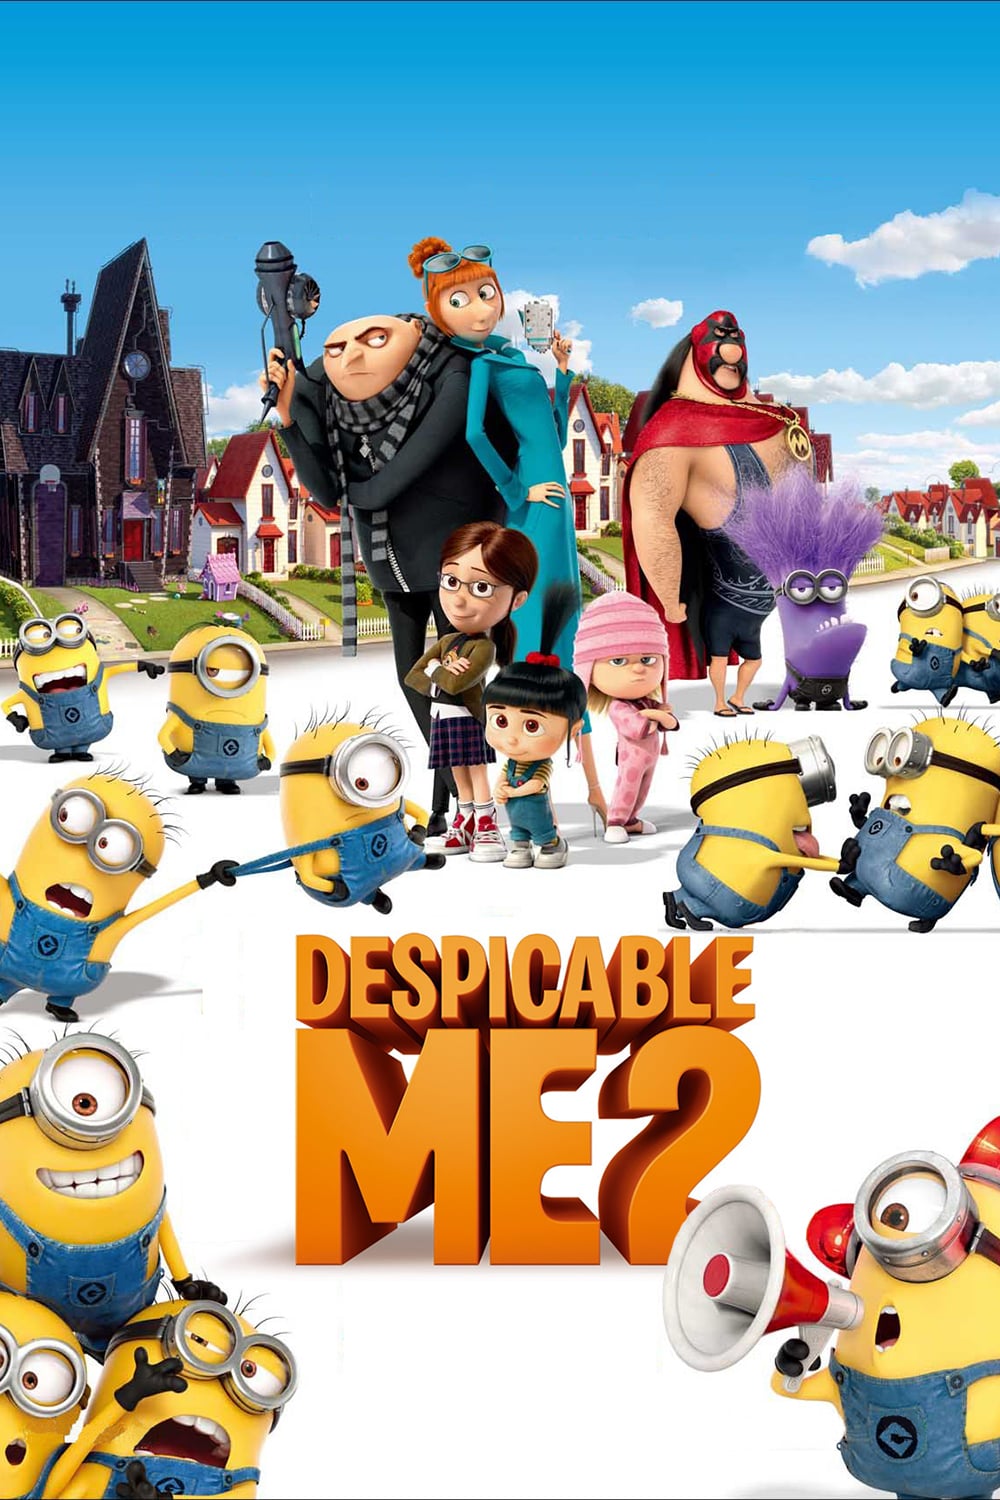 Despicable Me 2 Picture - Image Abyss